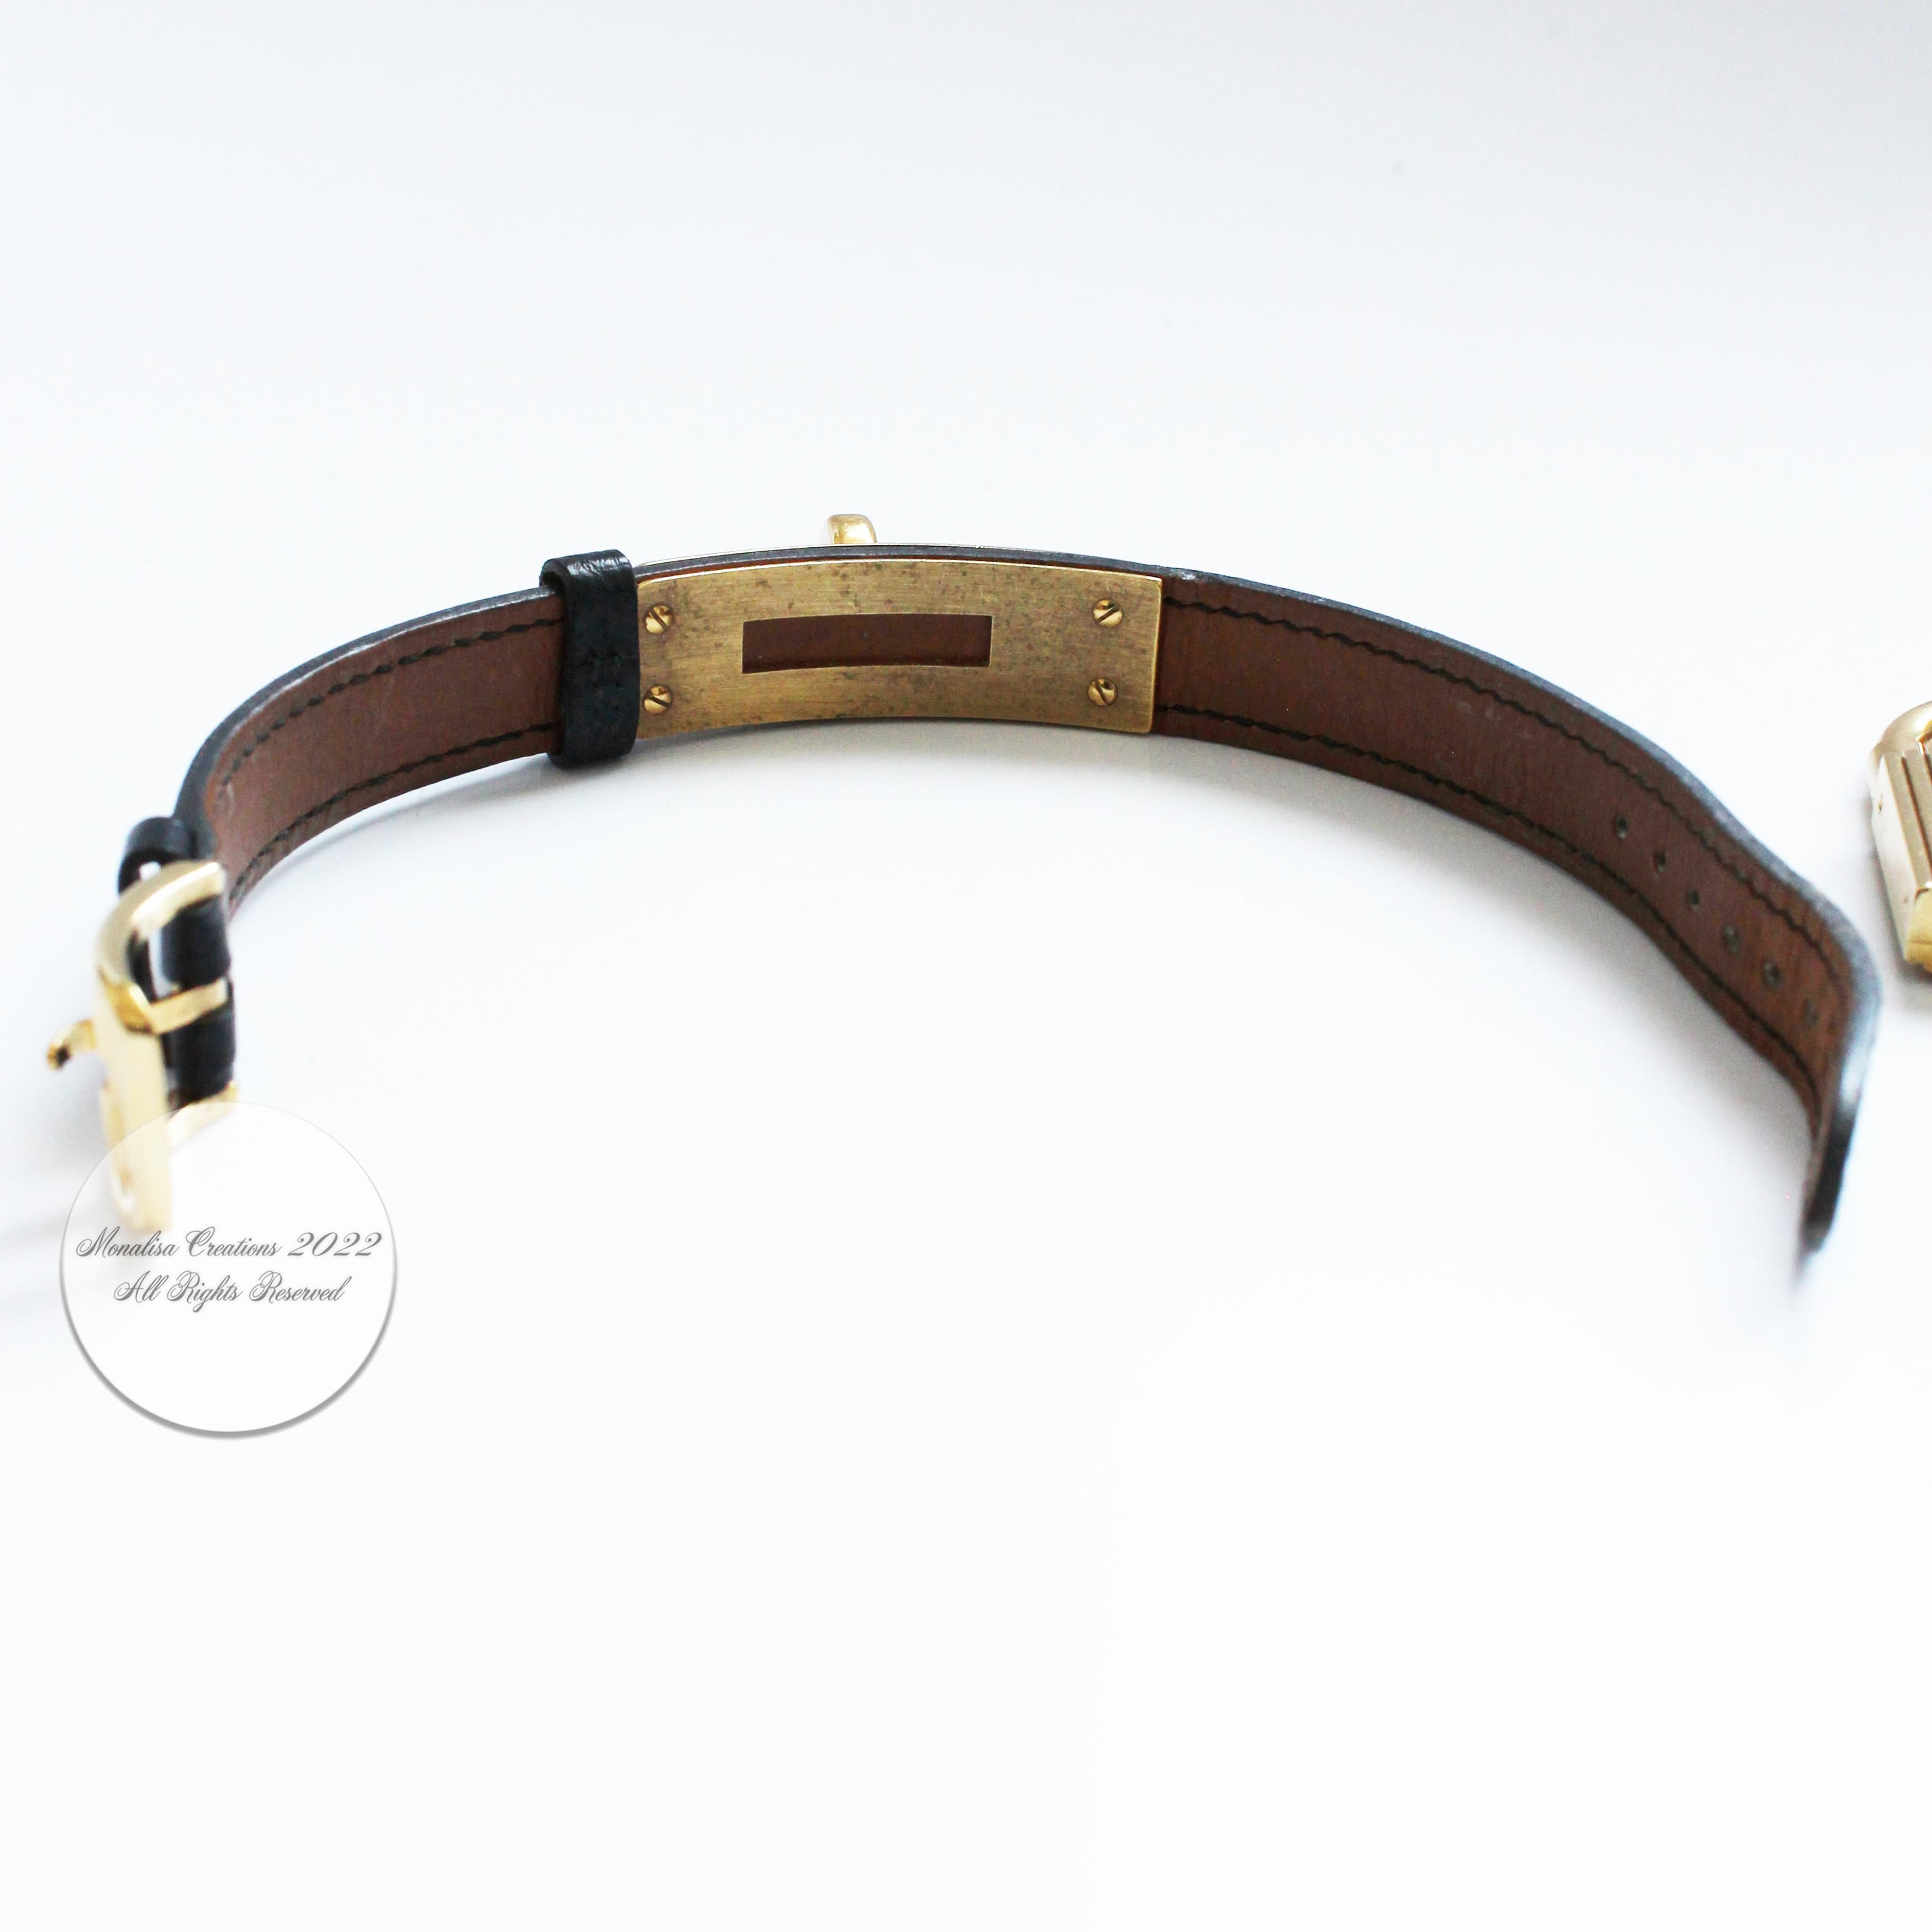 Hermes Kelly Watch Gold Cadena Lock Black Chèvre Mysore Leather Strap 1990s In Good Condition For Sale In Port Saint Lucie, FL